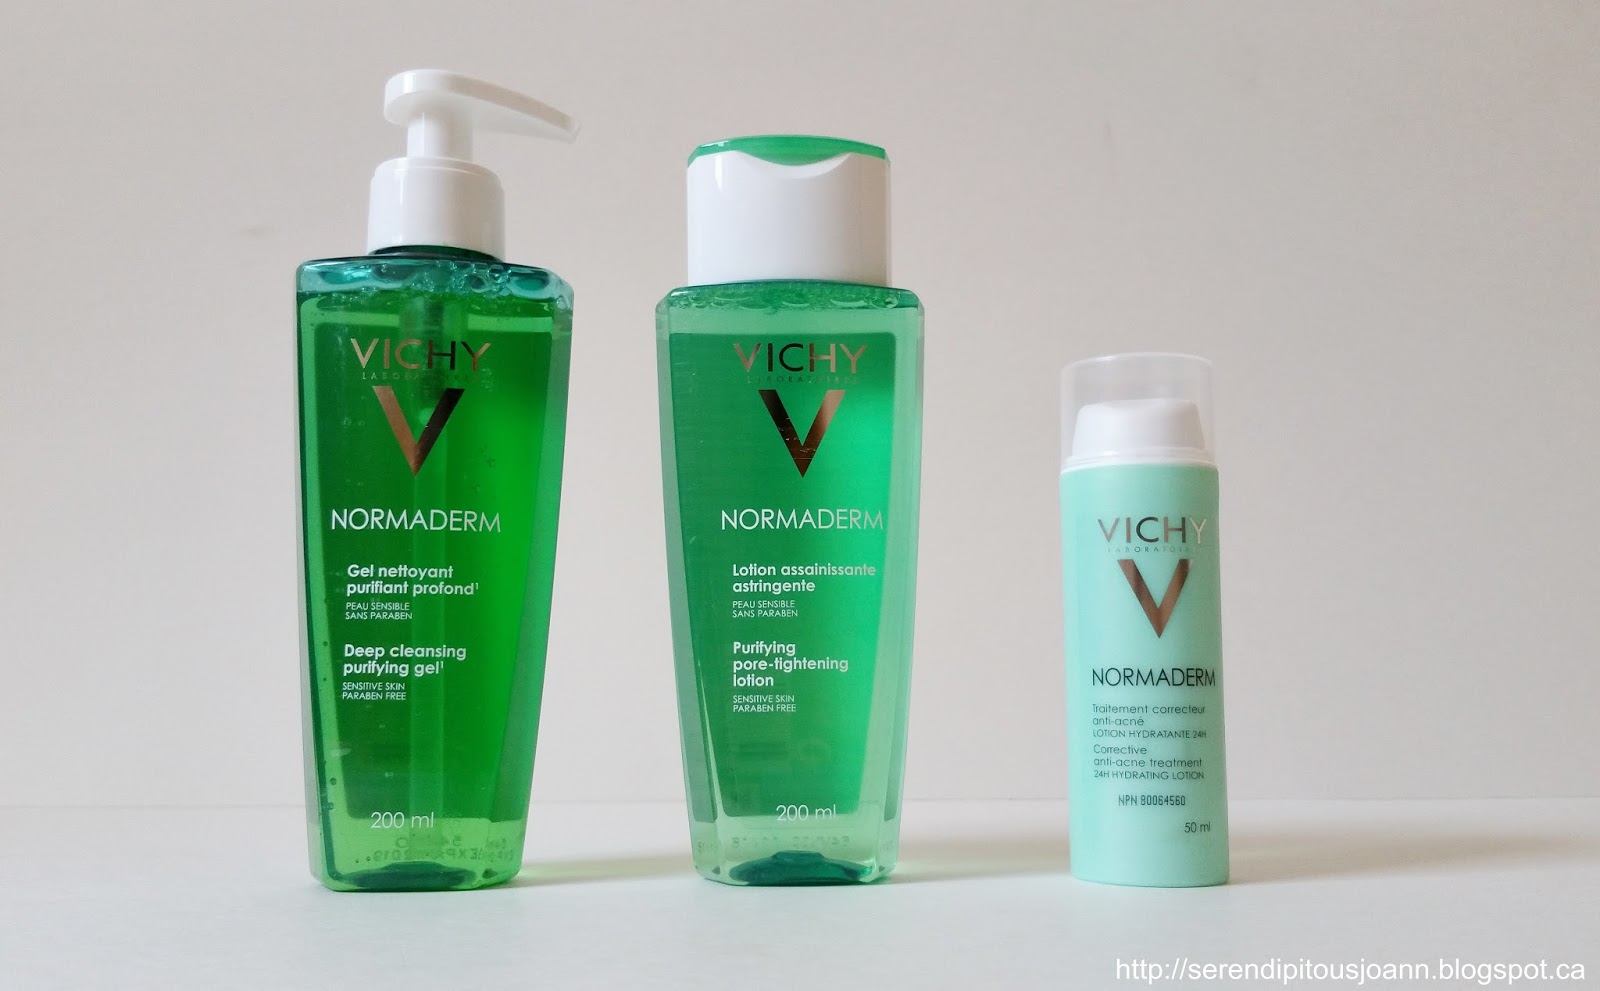 Normaderm gel purifiant intense. Vichy Normaderm Lotion. Vichy Нормадерм acne prone Skin. Vichy Normaderm Cleanser 3 в 1. Normaderm Gel Cleanser.